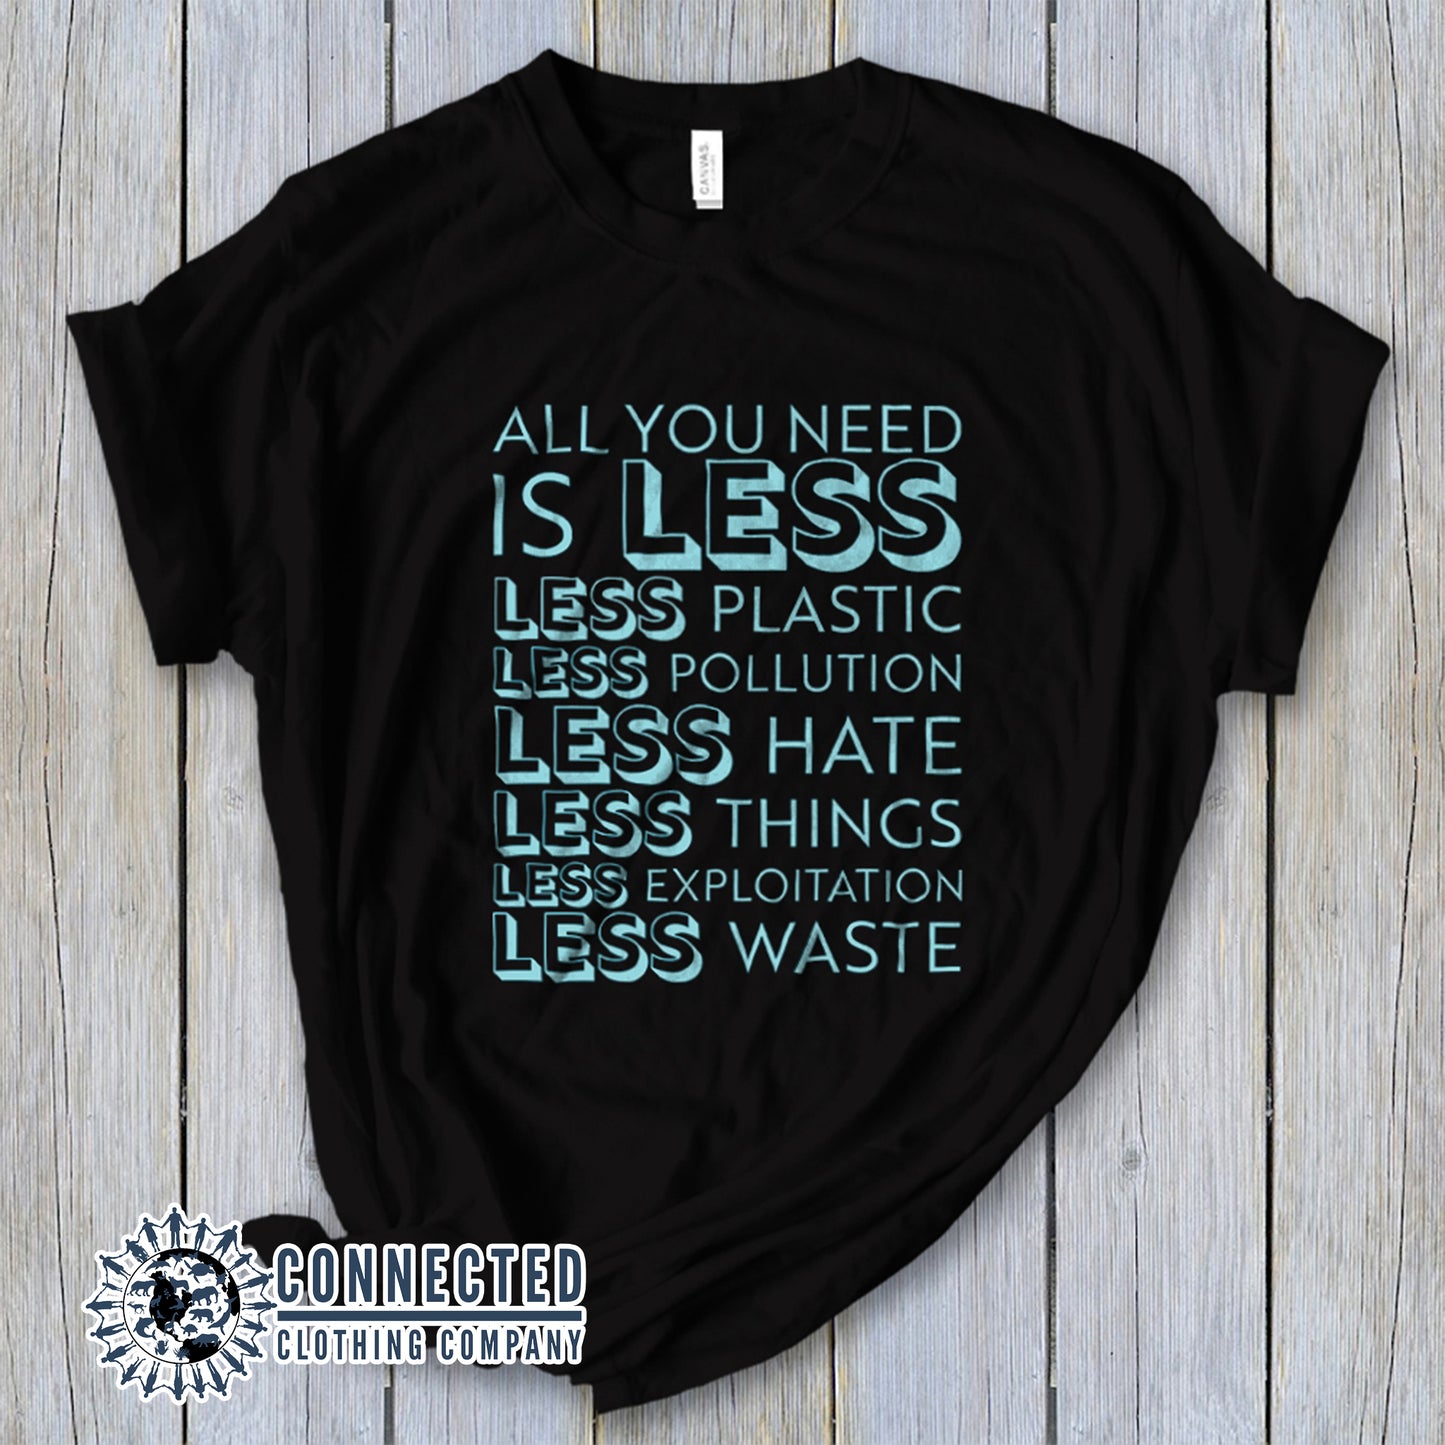 Black All You Need Is Less Short-Sleeve Unisex Tee reads "all you need is less. less plastic. less pollution. less hate. less things. less exploitation. less waste." - Connected Clothing Company - Ethically and Sustainably Made - 10% of profits donated to Mission Blue ocean conservation